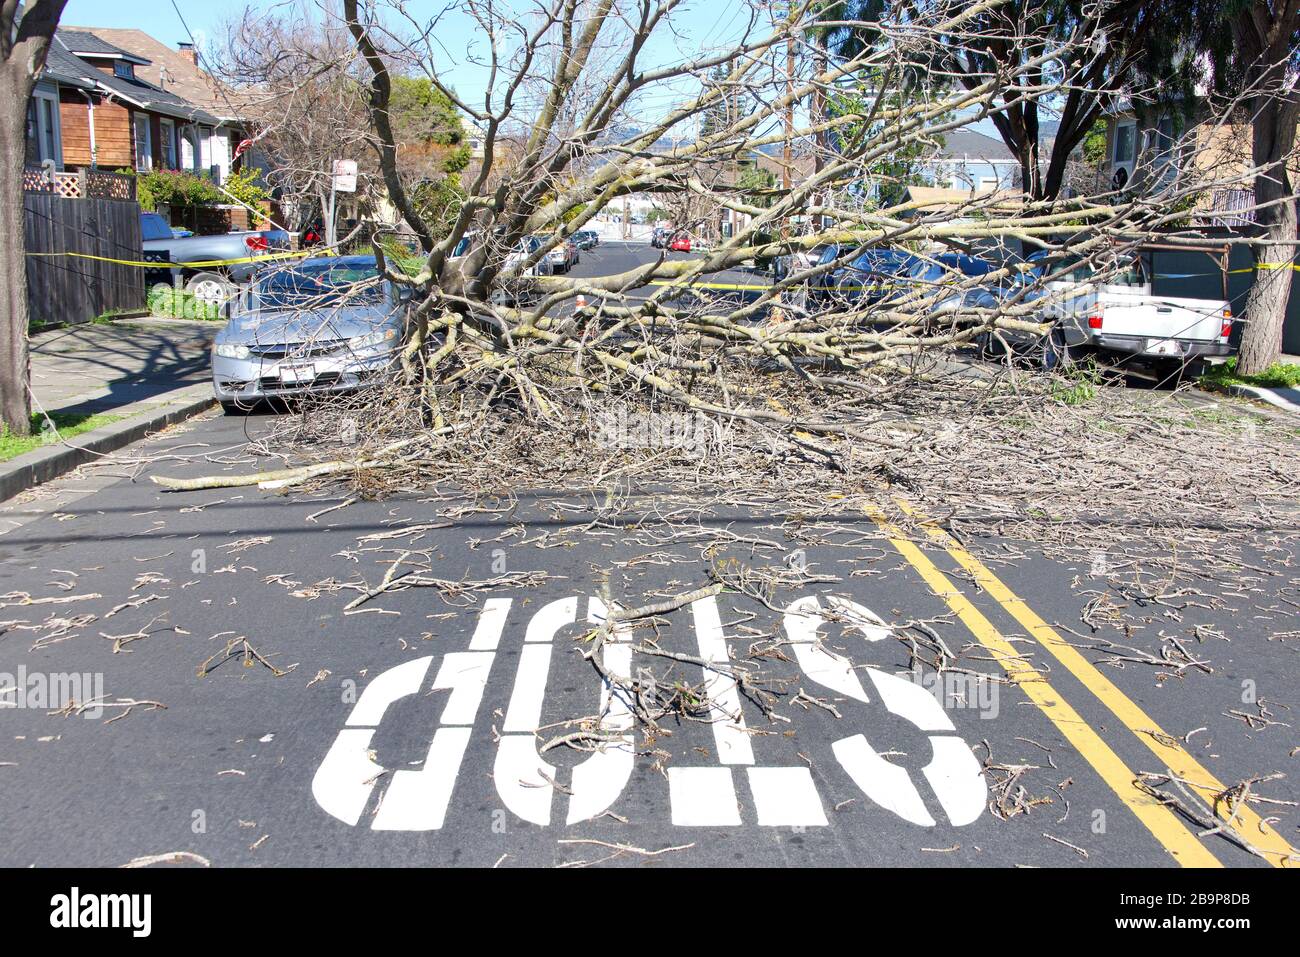 Stop sign painted on road with branches shattered across road from fallen tree, narrowly missing parked cars. With spring buds on the branches. power Stock Photo